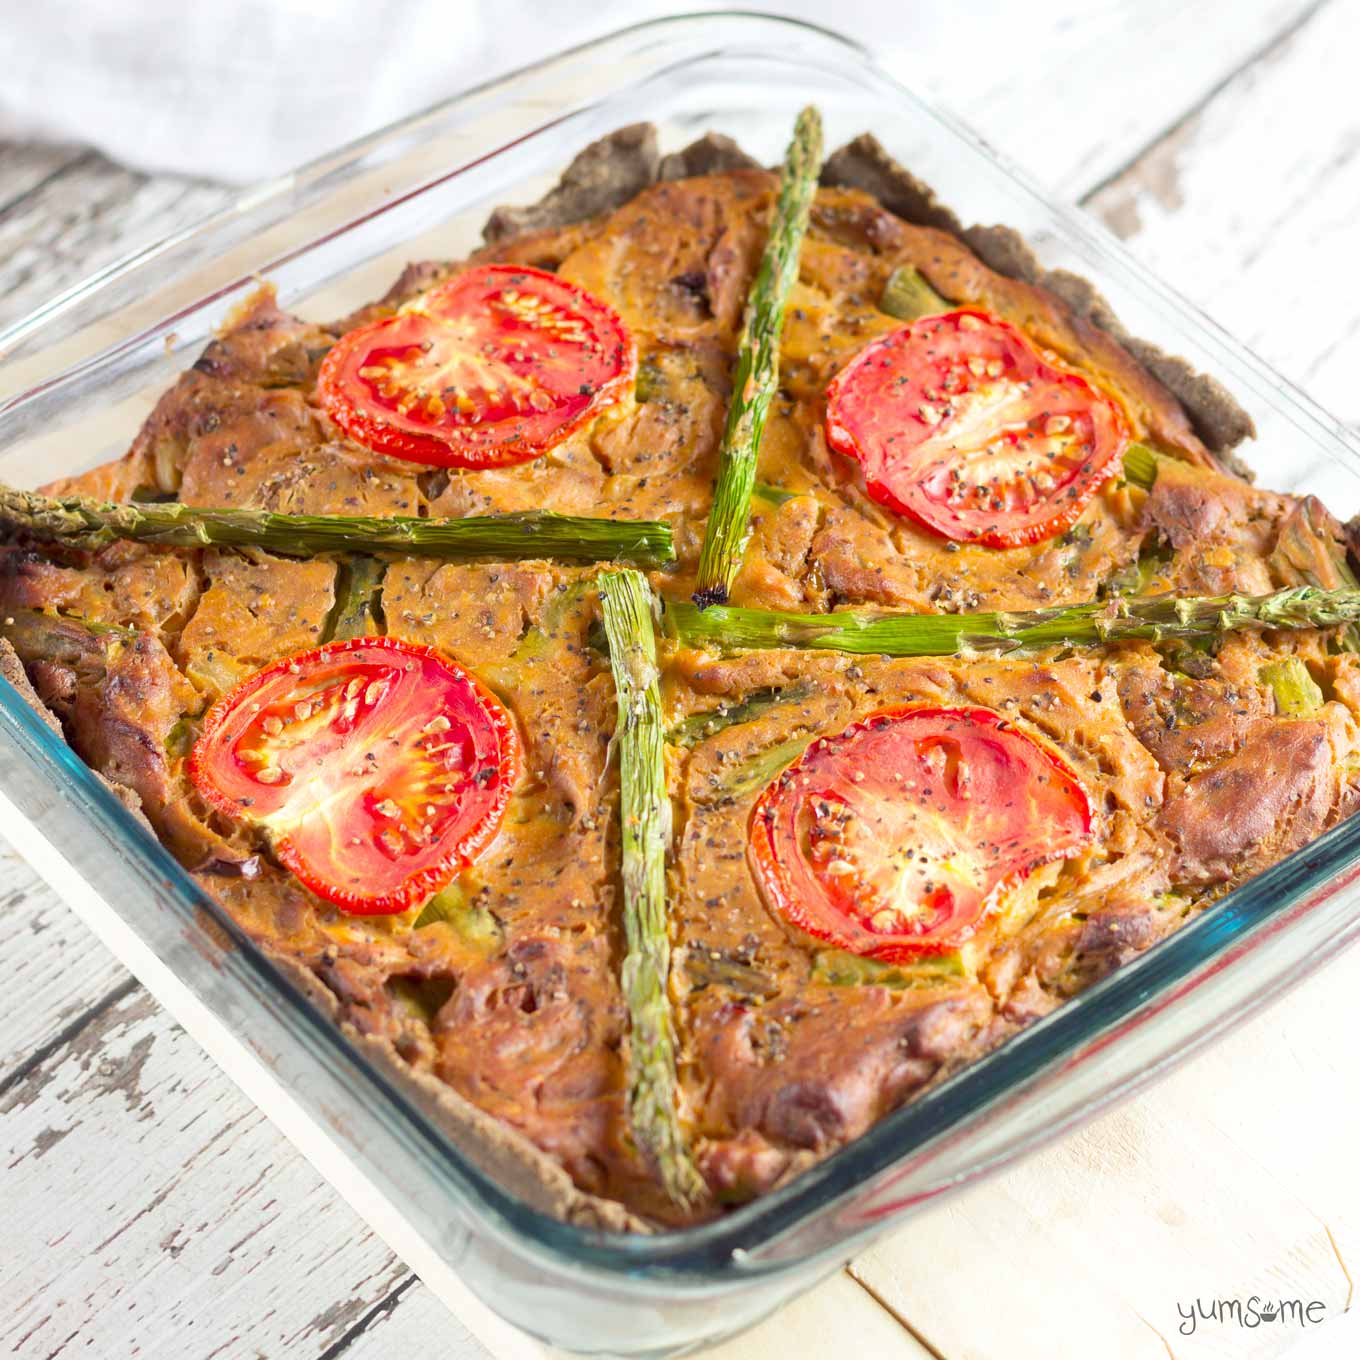 Creamy, savoury, and filling, this gluten-free vegan asparagus and sun-dried tomato quiche is as simple as it's yummy! | yumsome.com